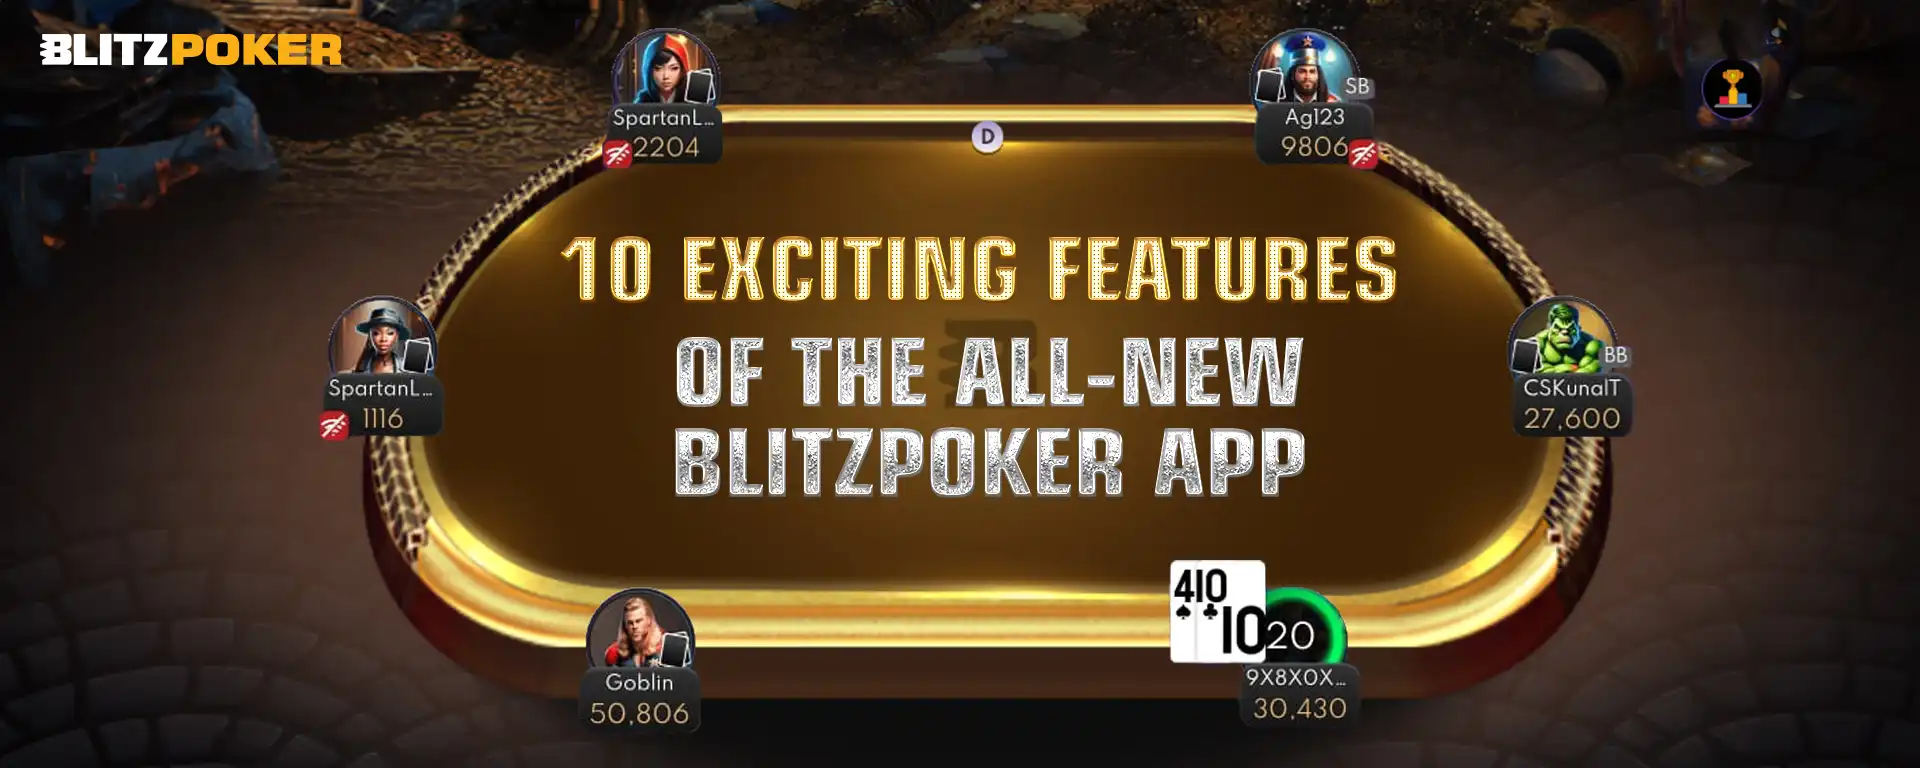 10 Exciting Features of the All-New BLITZPOKER App You Should Know!